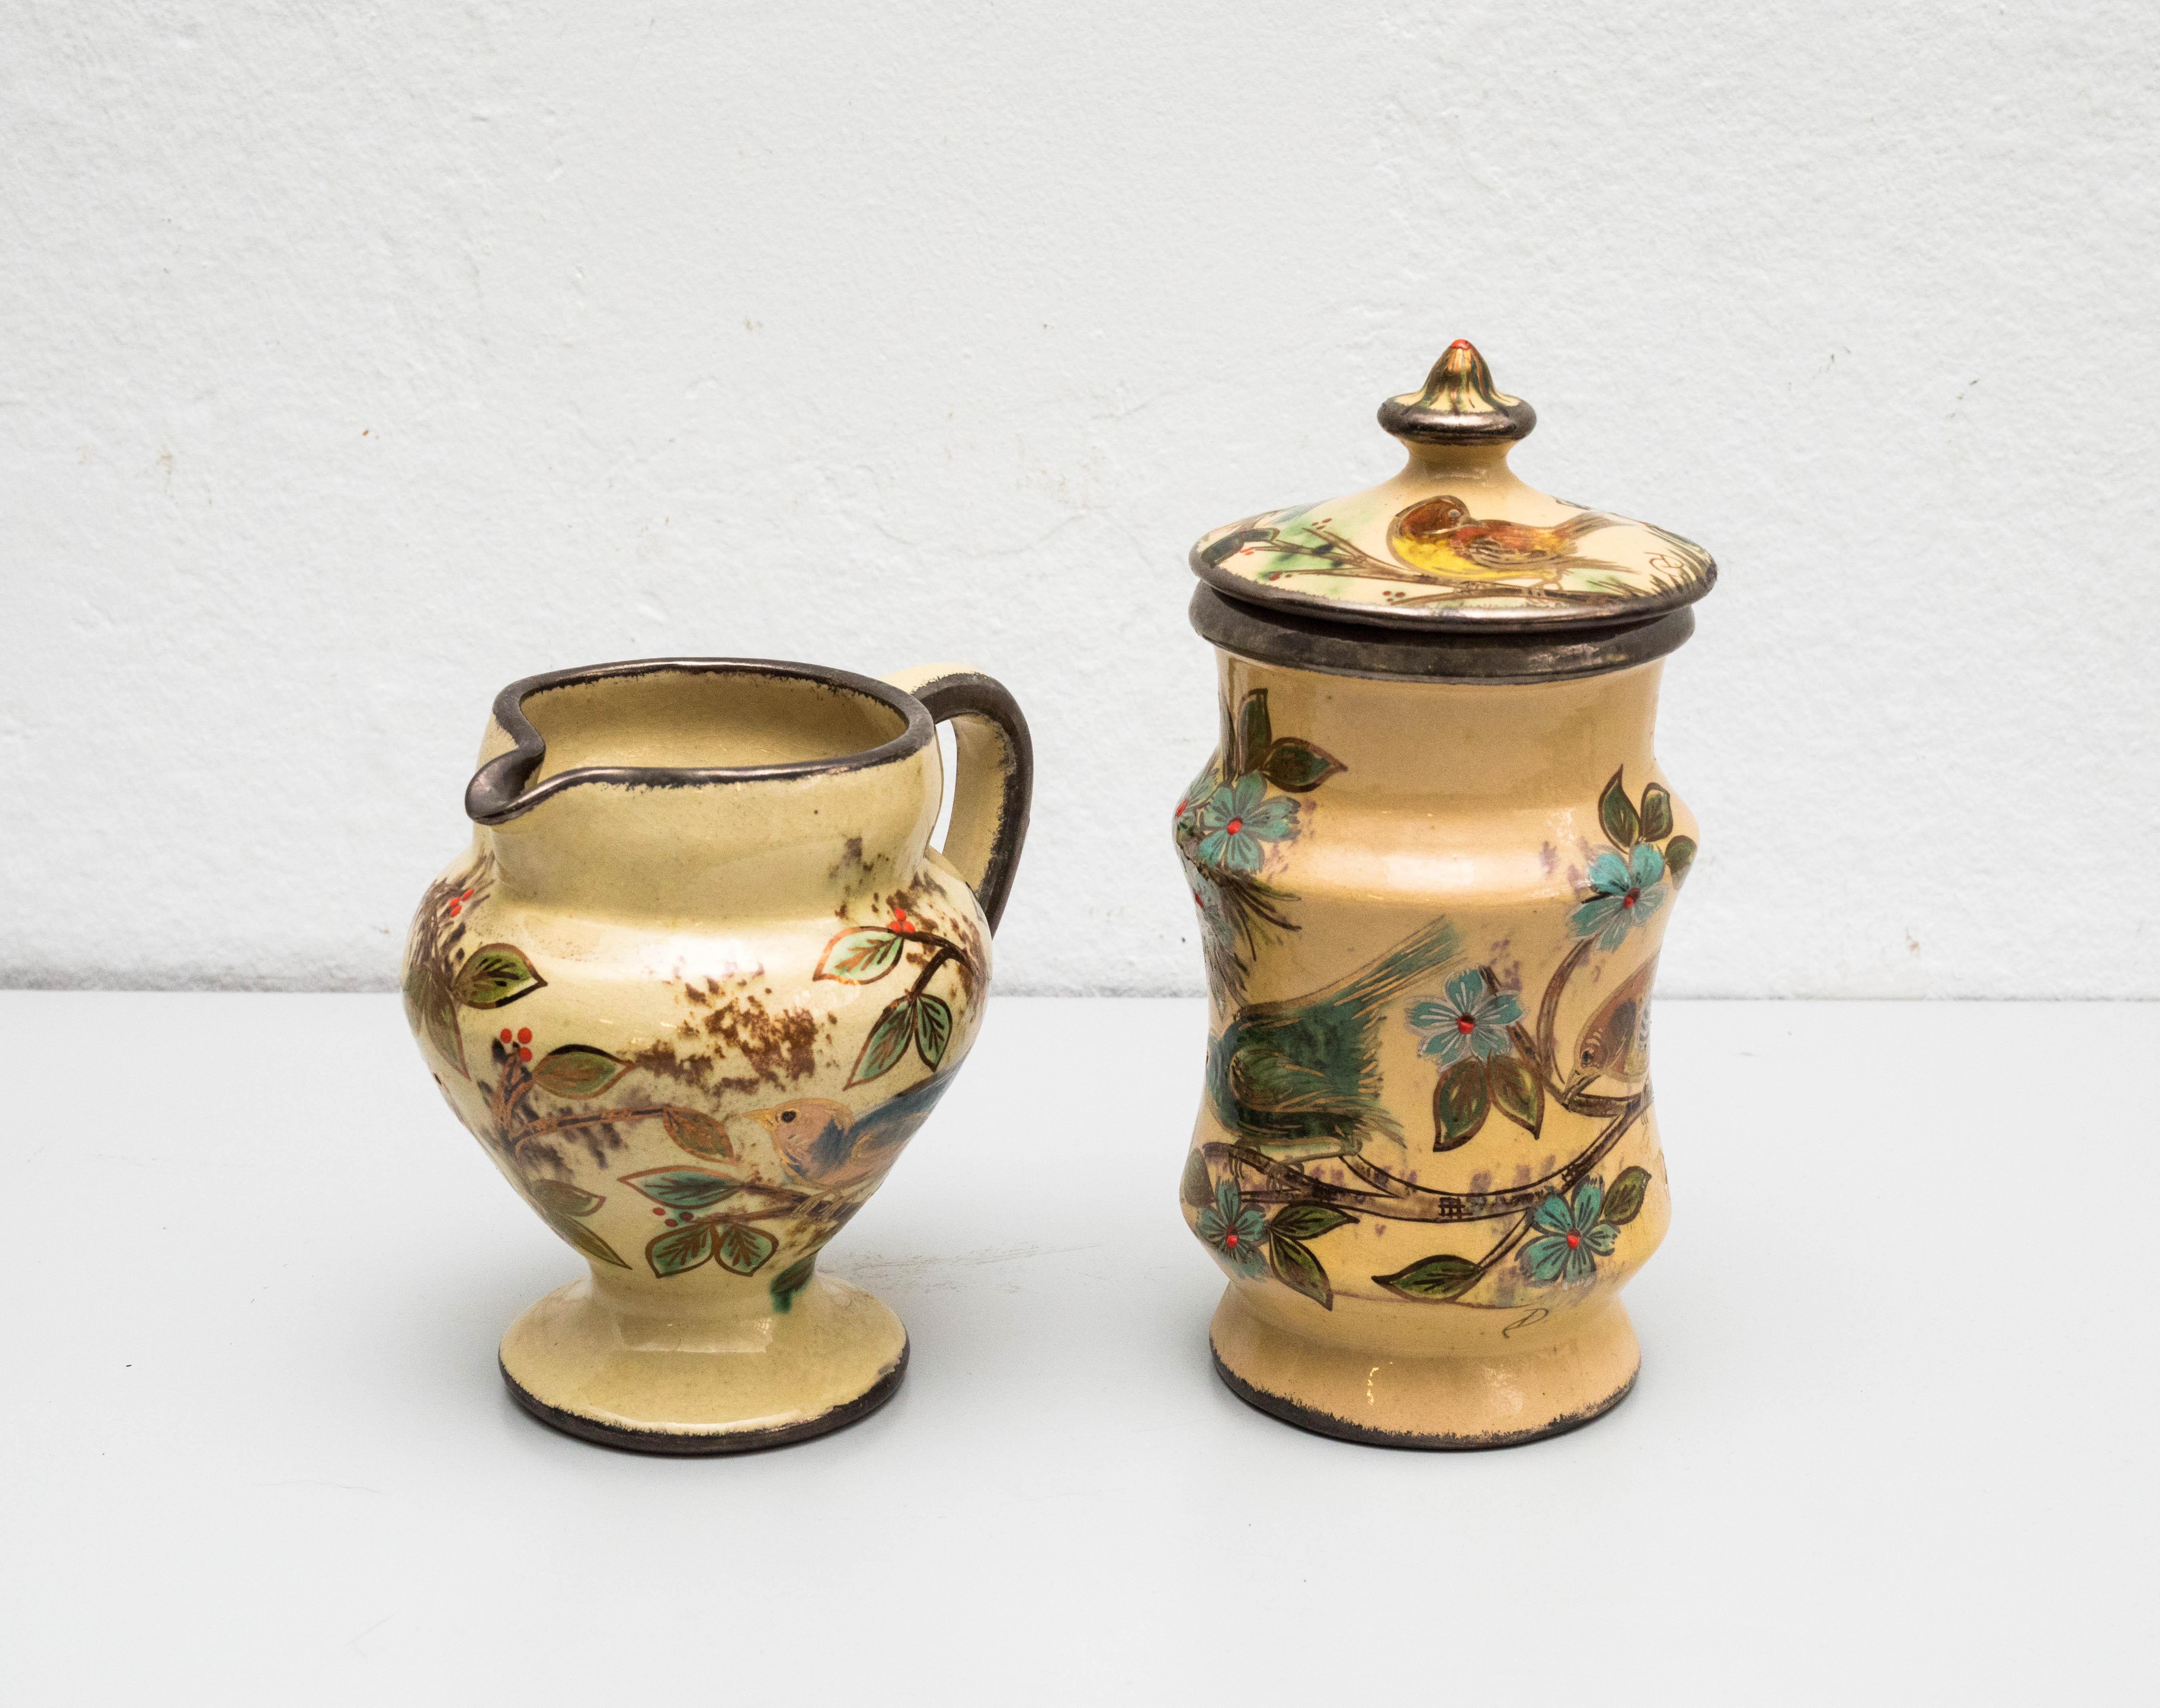 Set of Ceramic hand painted vases by Catalan artist Diaz Costa, circa 1960.
Manufactured in Spain.
Signed.

In original condition, with minor wear consistent of age and use, preserving a beautiul patina.

Dimensions
H 12           H26.5
W 16.5.     